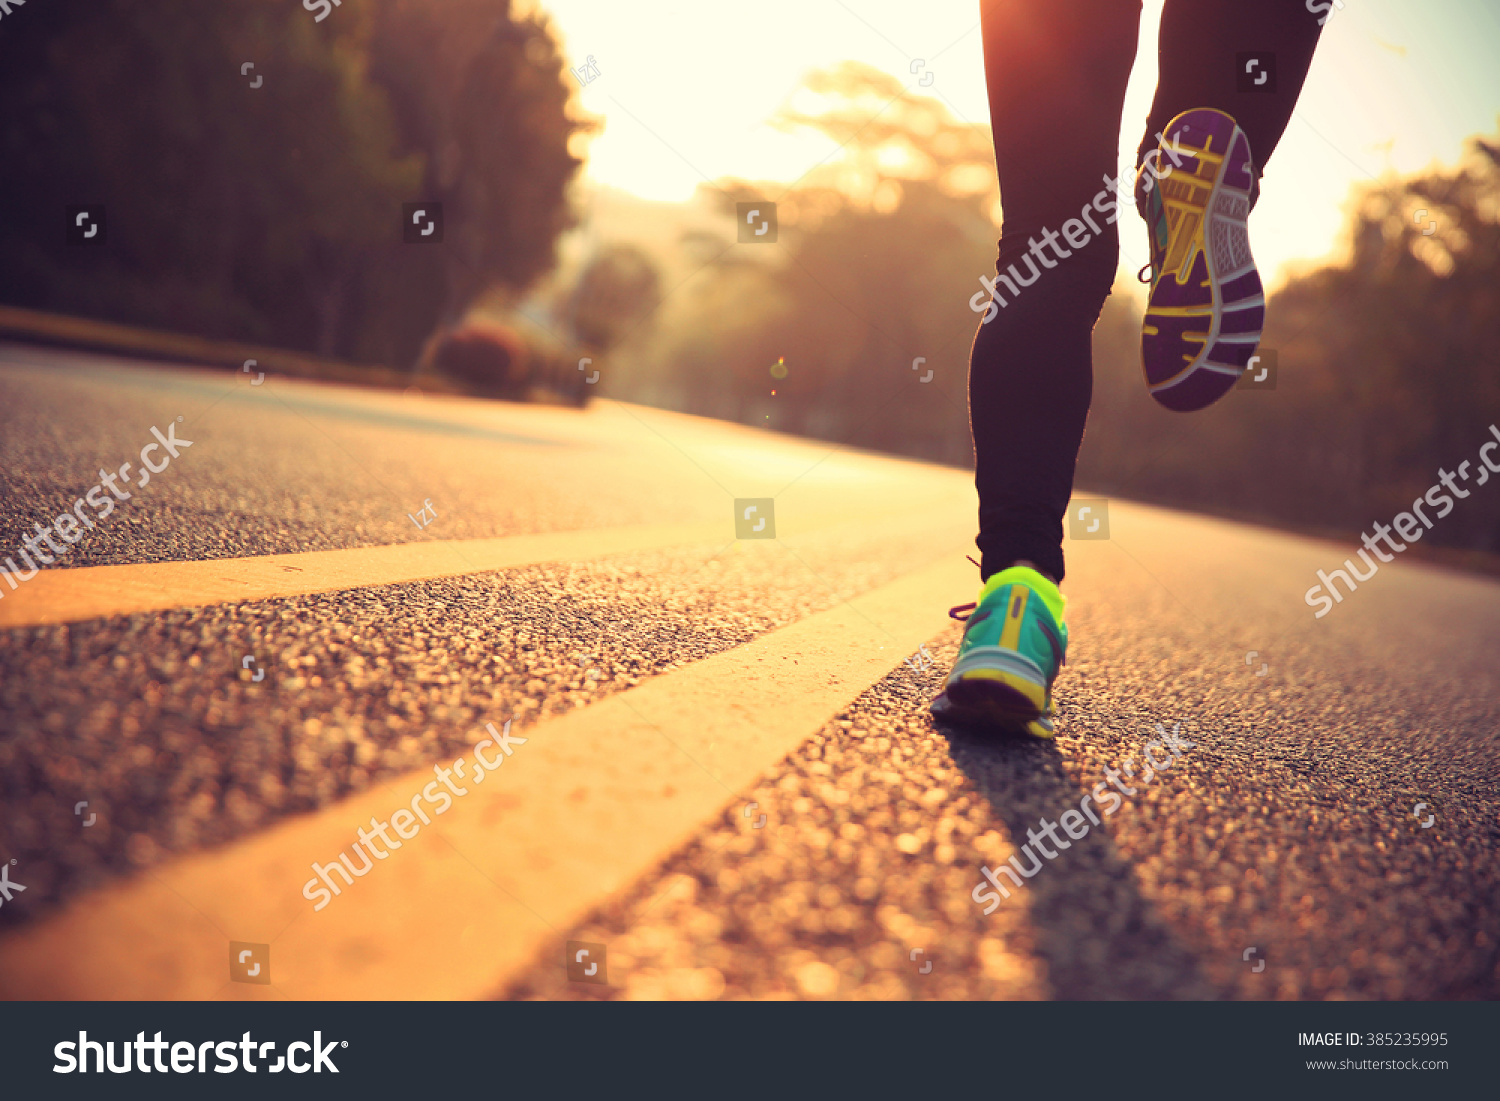 young fitness woman runner athlete running at road #385235995